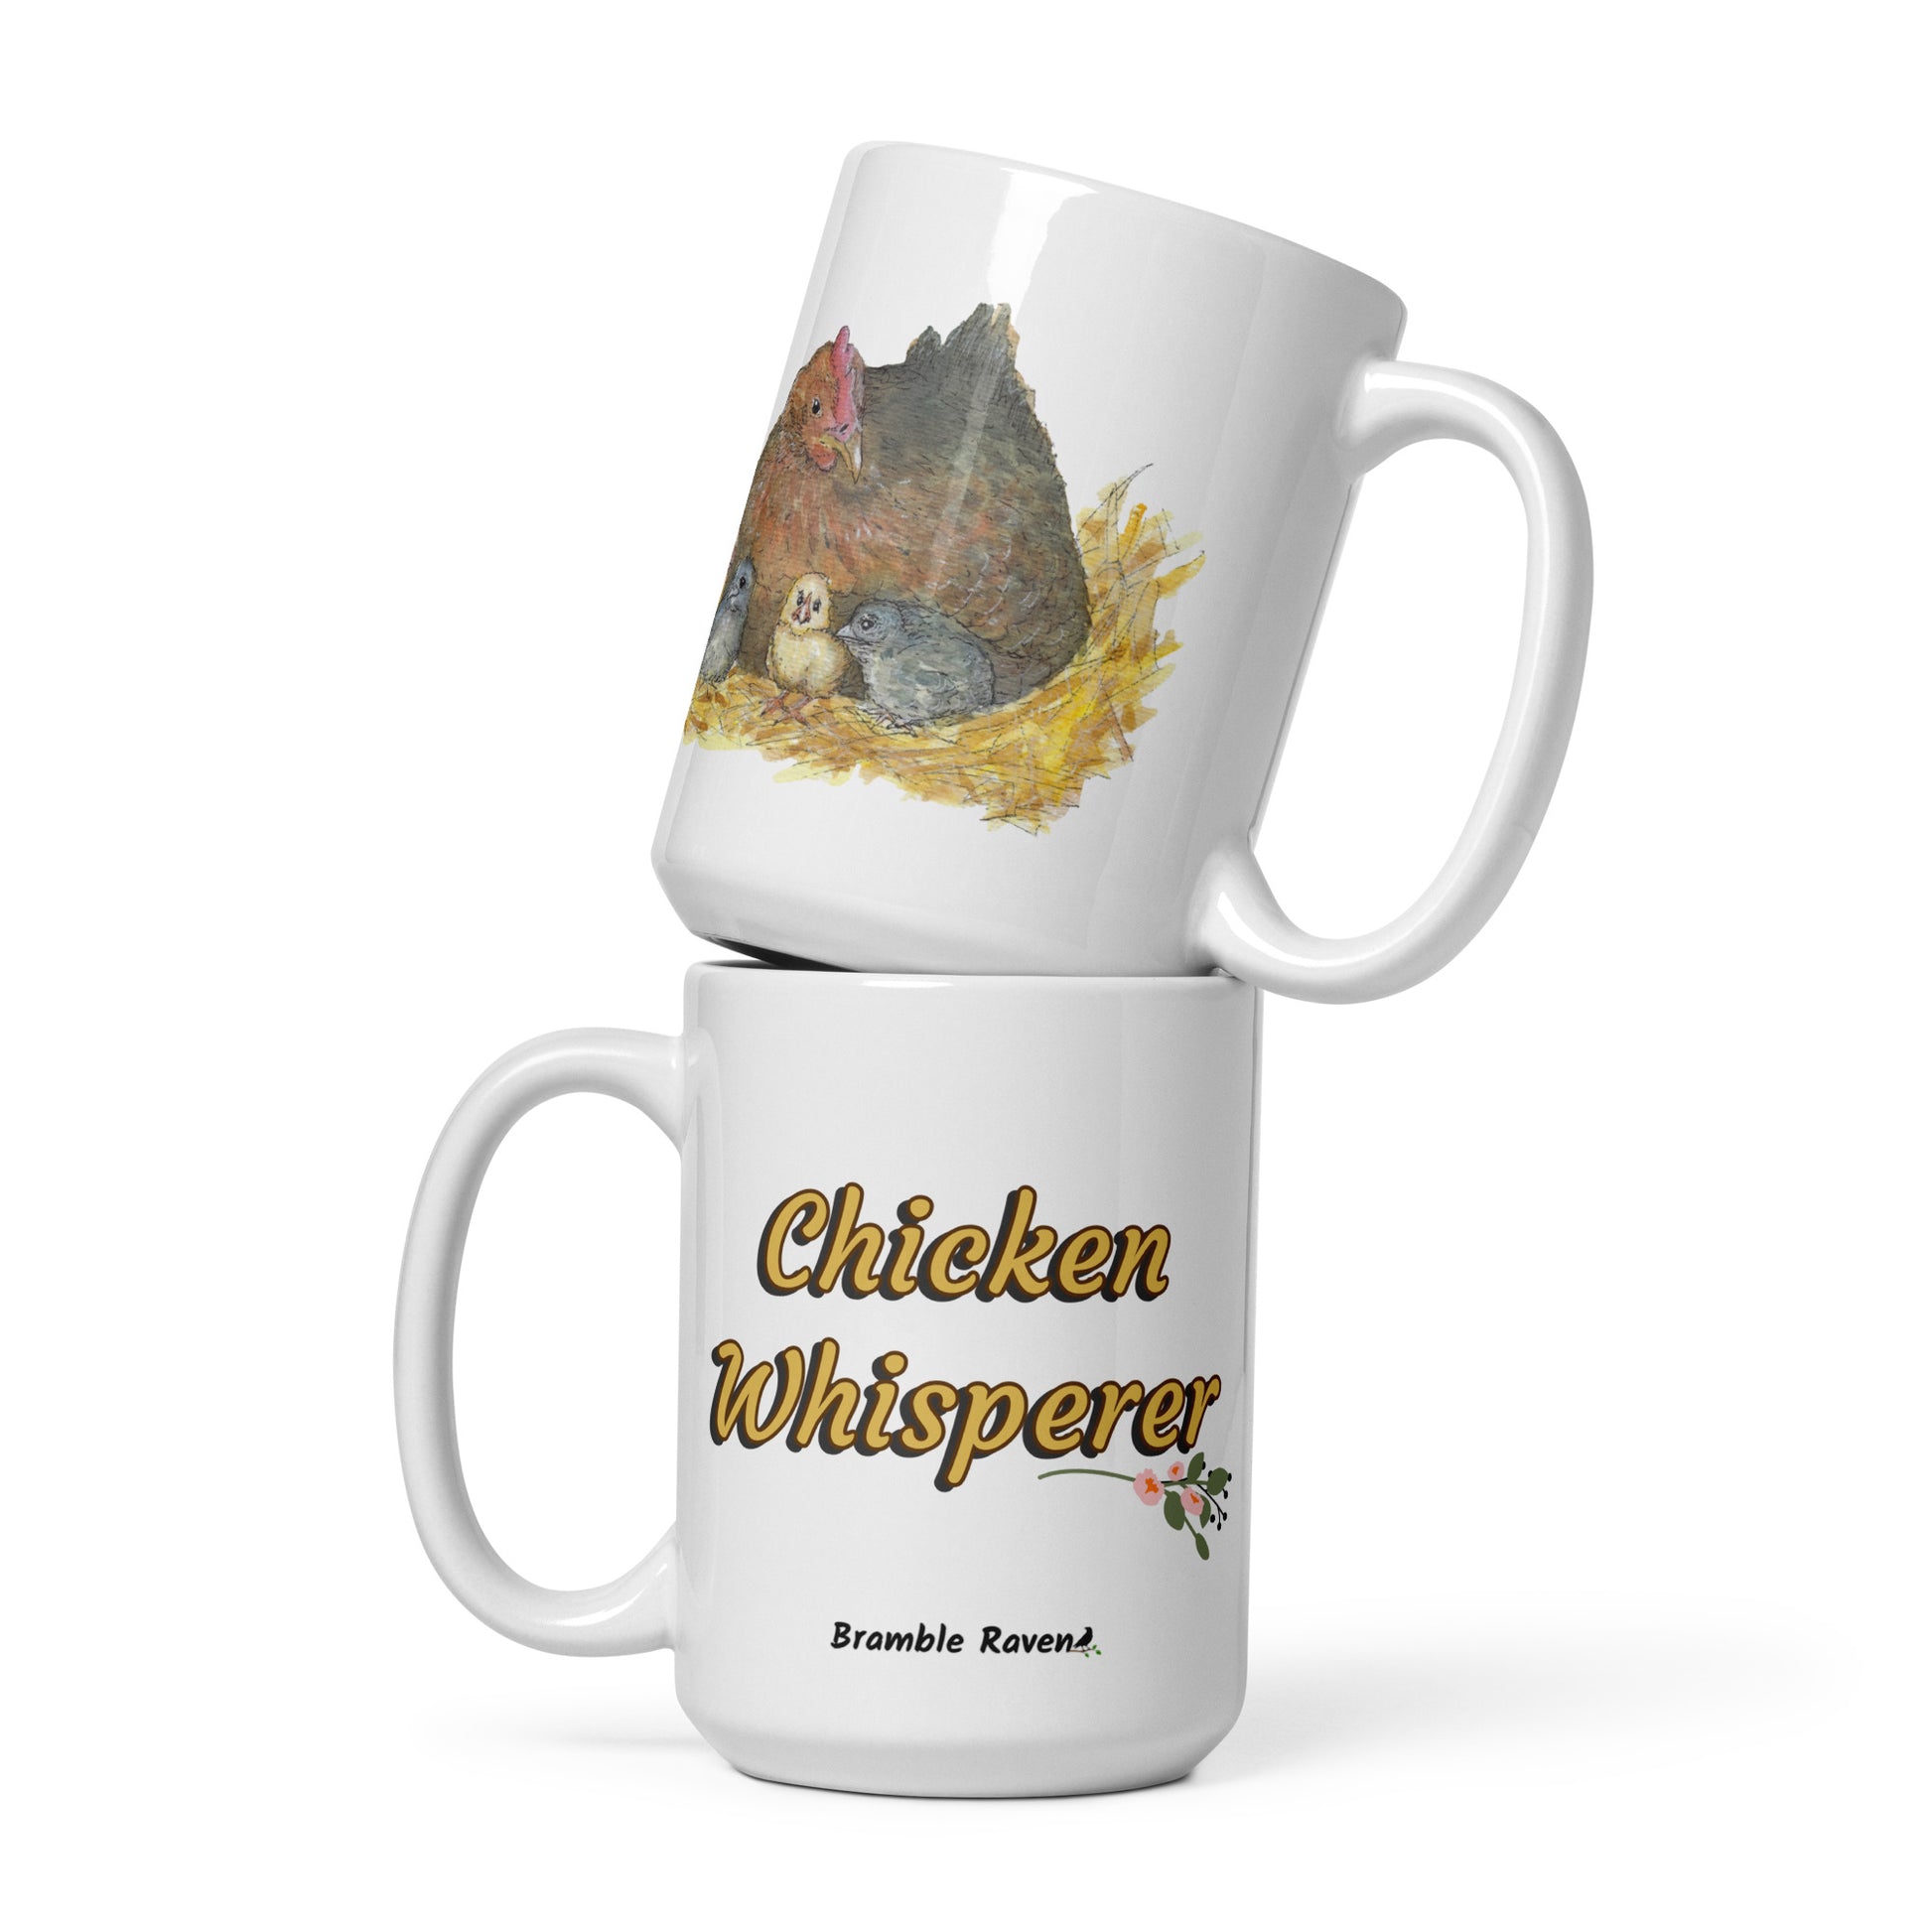 15 ounce white ceramic chicken whisperer mug. Features print of watercolor mother hen and chicks on one side and chicken whisperer text on the other. Dishwasher and microwave safe. Image shows two mugs stacked.